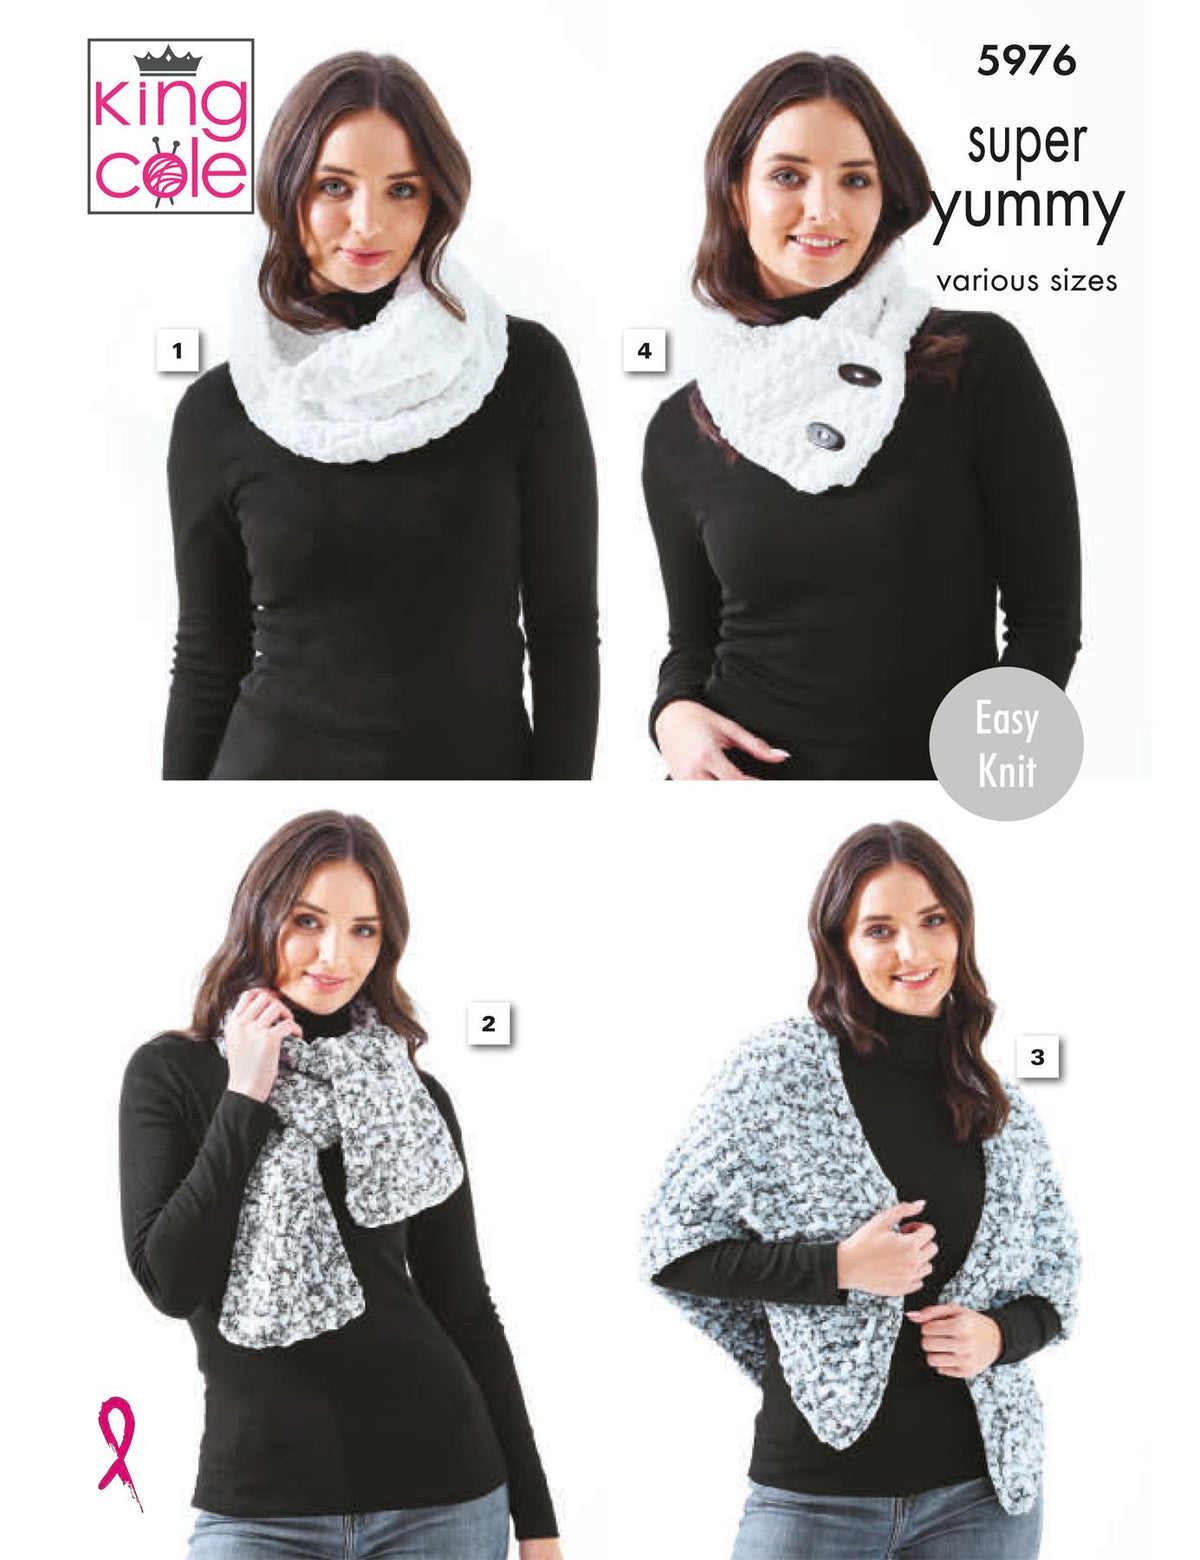 King Cole Super Yummy knitting pattern (5975) cowl and scarves